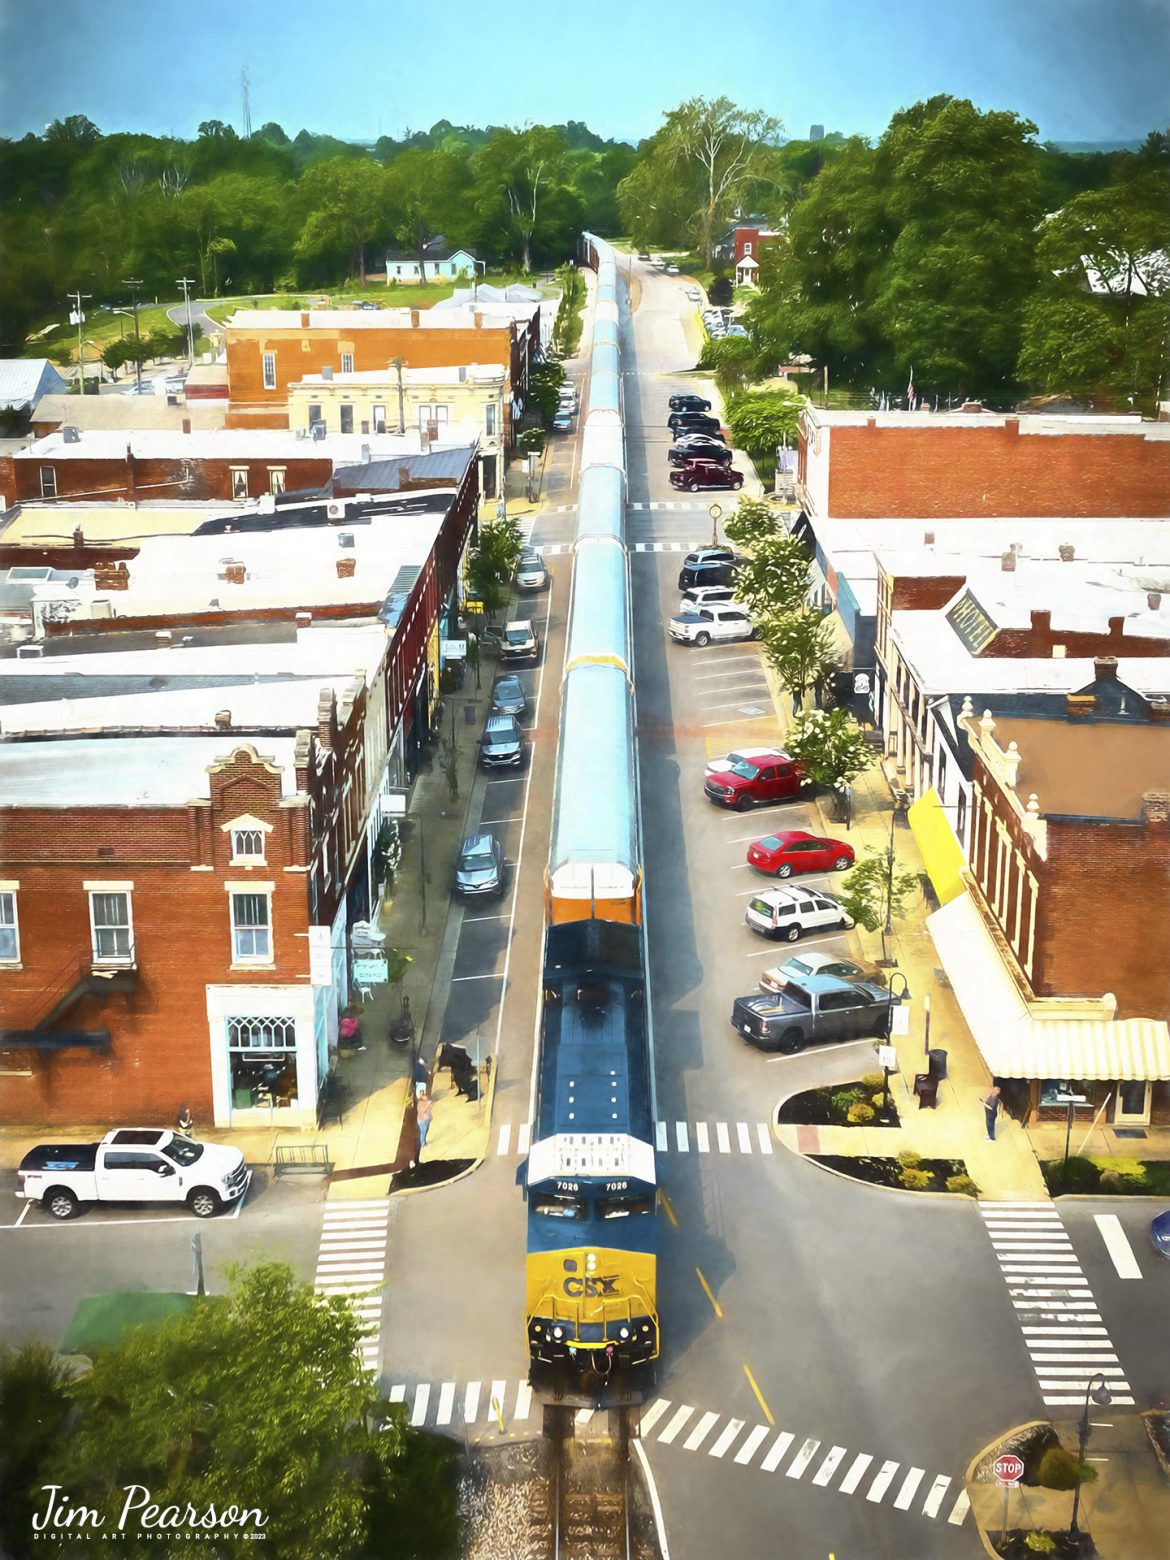 CSXT 7026 leads CSX M352, a loaded autorack train as they street run through downtown LaGrange, Kentucky, headed north on the LCL Subdivision on May 17th, 2023.

According to the Train Aficionado website: CSX runs through La Grange on what is known as the LCL Subdivision. This 101-mile line connects Covington, Kentucky, to Louisville, Kentucky. The railroad tracks run right through the heart of the town literally. The railroad tracks are embedded on the eastbound side of the roadway for the whole stretch of downtown. The trains pass the city business district which includes quaint shops and restaurants. When looking up railfanning in La Grange most websites state anywhere from 14 to 20 trains travel through here daily.

According to Hidden History of La Grange, Ky by author and local historian Nancy Stearns, LaGrange is known for its trains. It became an important junction for the railroad, with lines going to Frankfort and Cincinnati, and this made the town an important stop for travelers and businesses. The interurban electric rail car made round trips from LaGrange to Louisville daily until automobiles surpassed the interurban in popularity.

Tech Info: DJI Mavic 3 Classic Drone, RAW, 24mm, f/2.8, 1/1250, ISO 100.

#trainphotography #railroadphotography #trains #railways #dronephotography #trainphotographer #railroadphotographer #jimpearsonphotography #CSXtrains #mavic3classic #drones #trainsfromtheair #trainsfromadrone #emptycoaltrain #autoracktrain #kentuckytrains #LaGrangeKy #streetrunningtrains